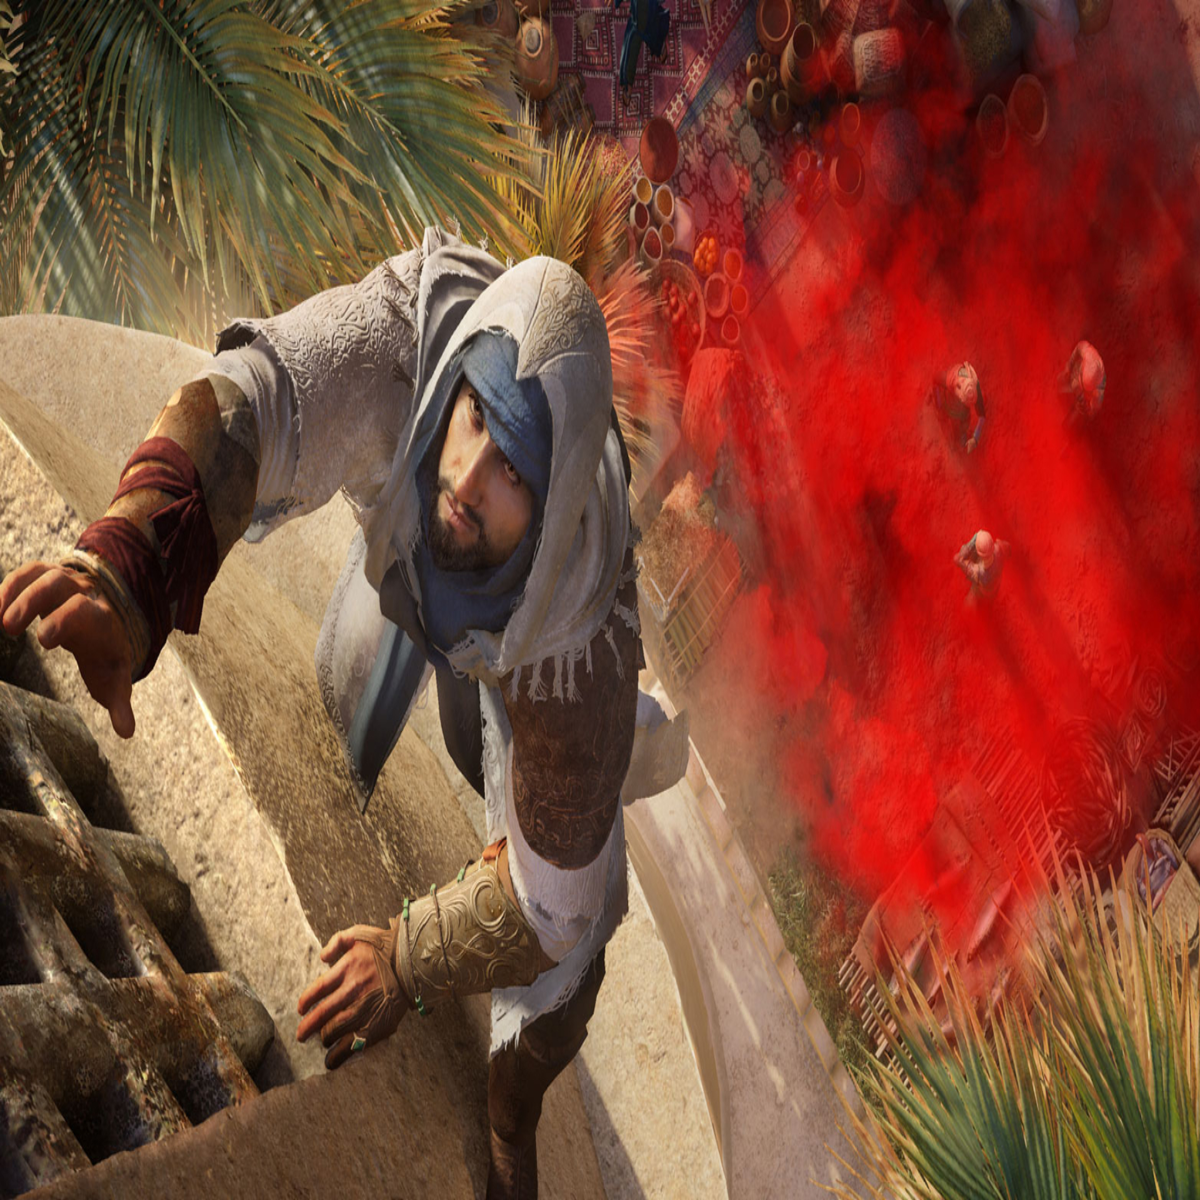 Assassin's Creed Valhalla - Everything you need to know